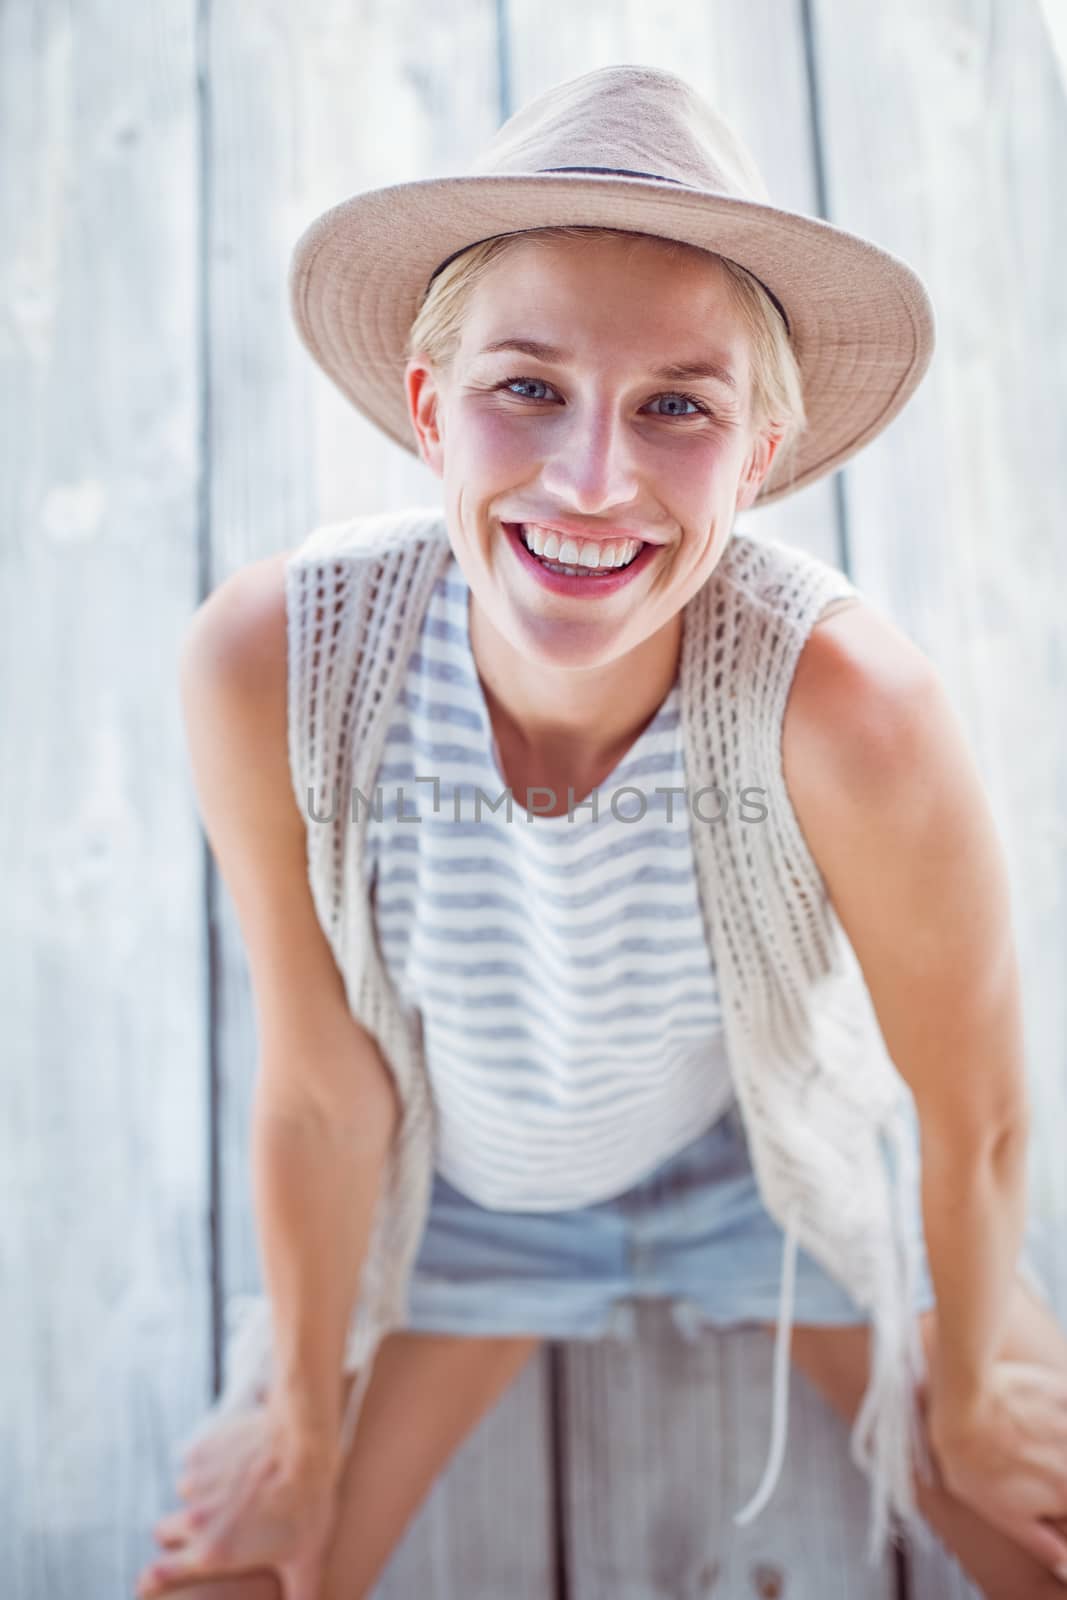 Pretty blonde woman wearing hat and smiling at camera on wooden background